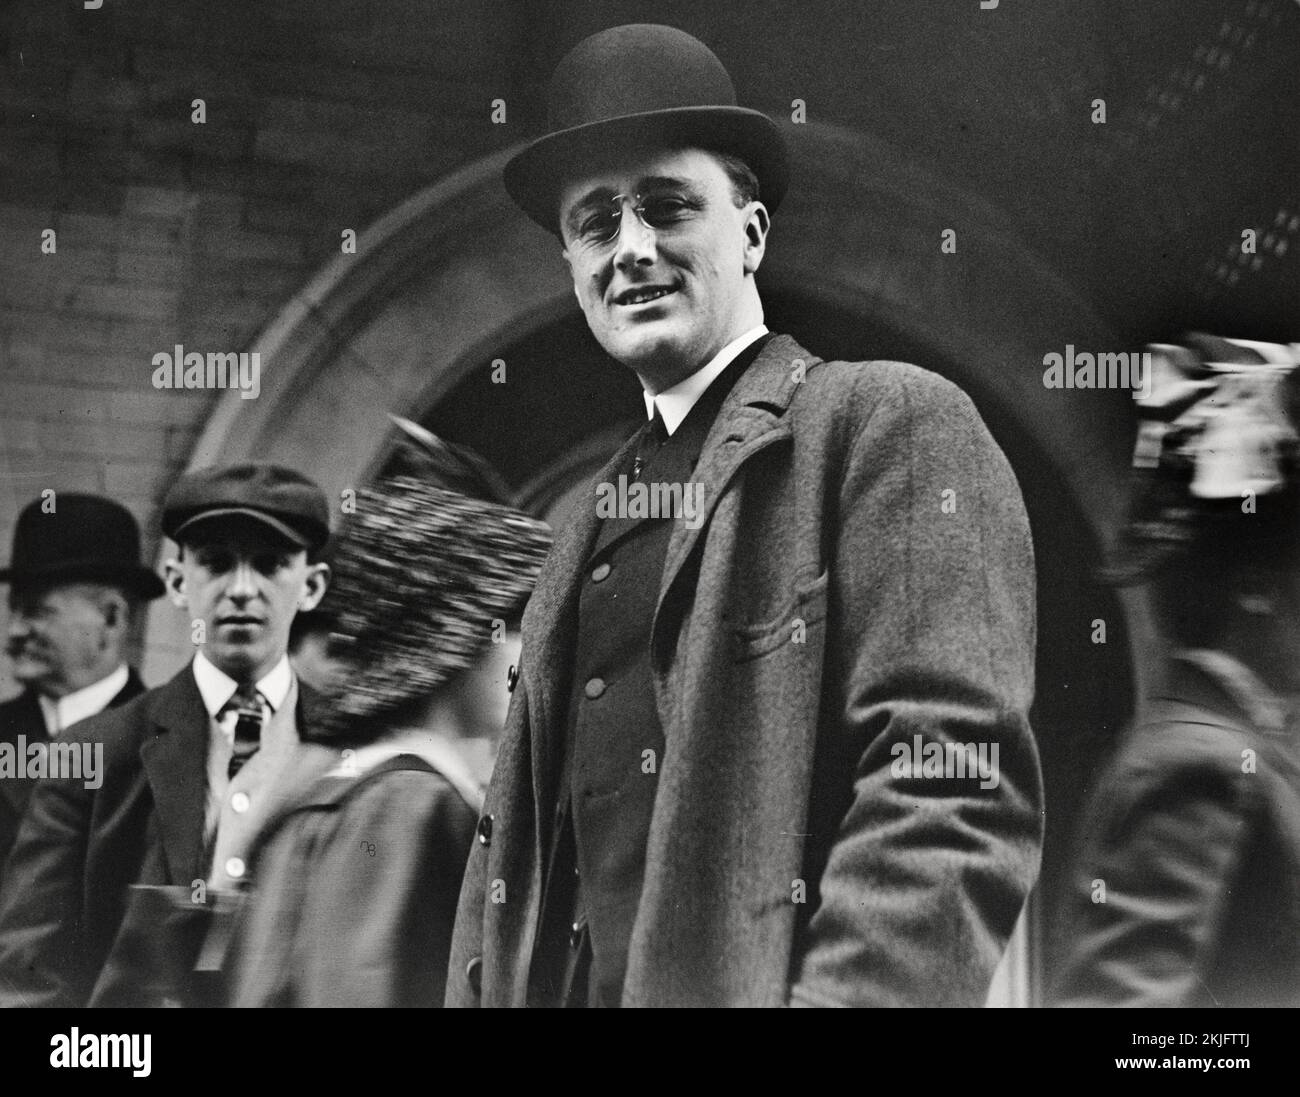 A photograph of President Franklin D Roosevelt in 1912 when he was 30 yrs old. Stock Photo